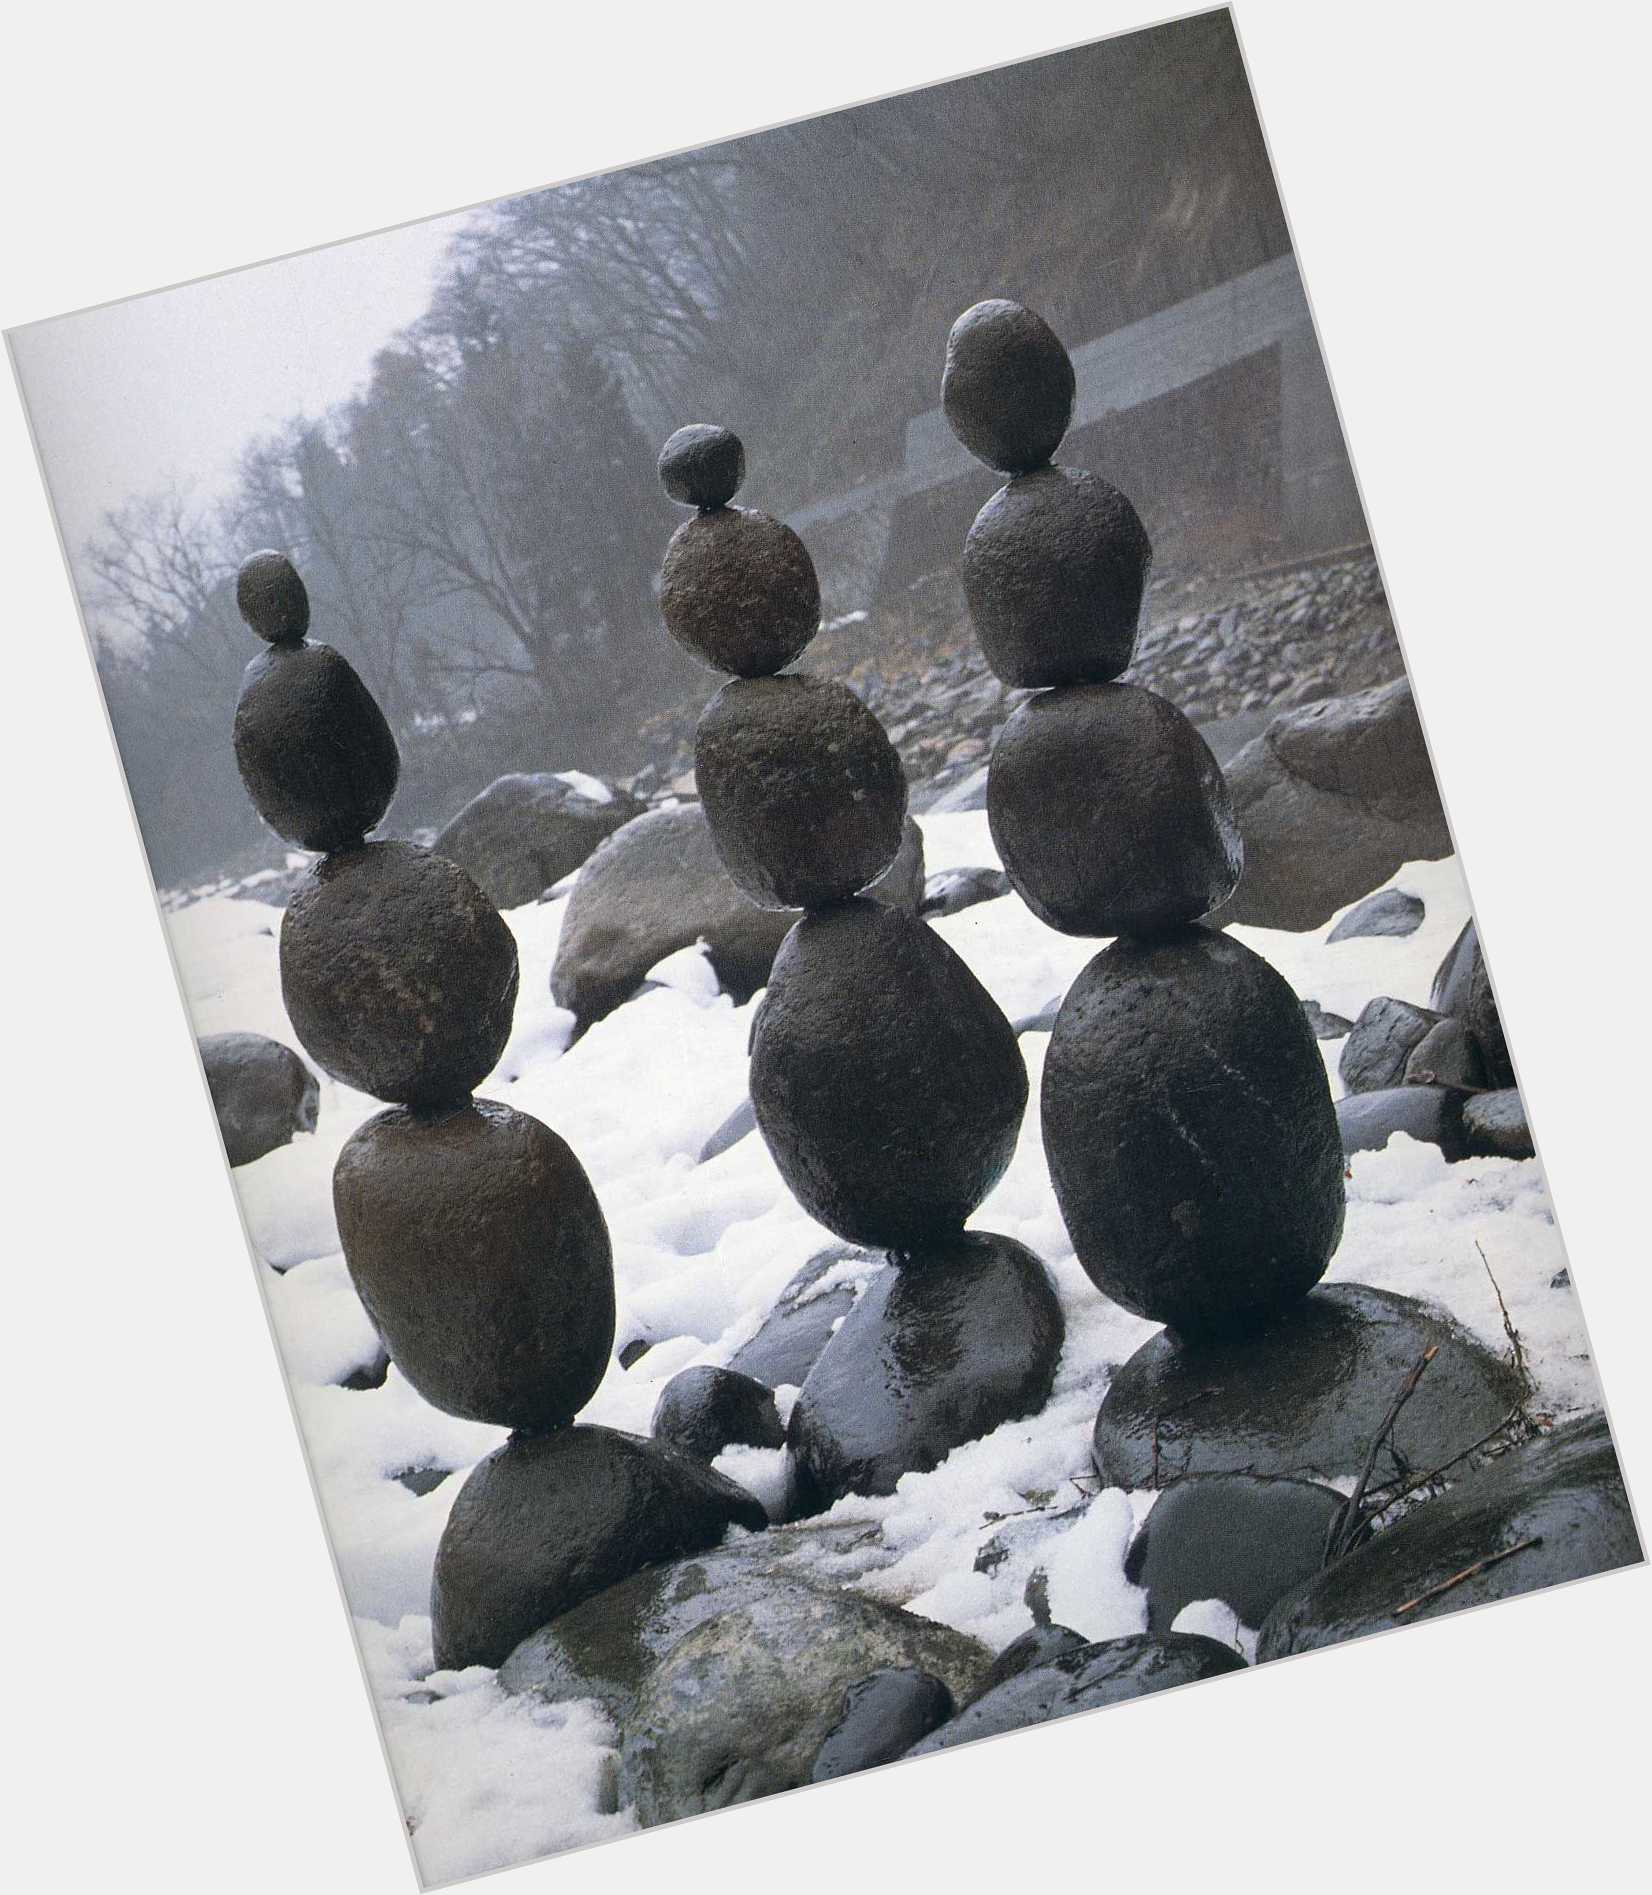 Andy Goldsworthy hairstyle 3